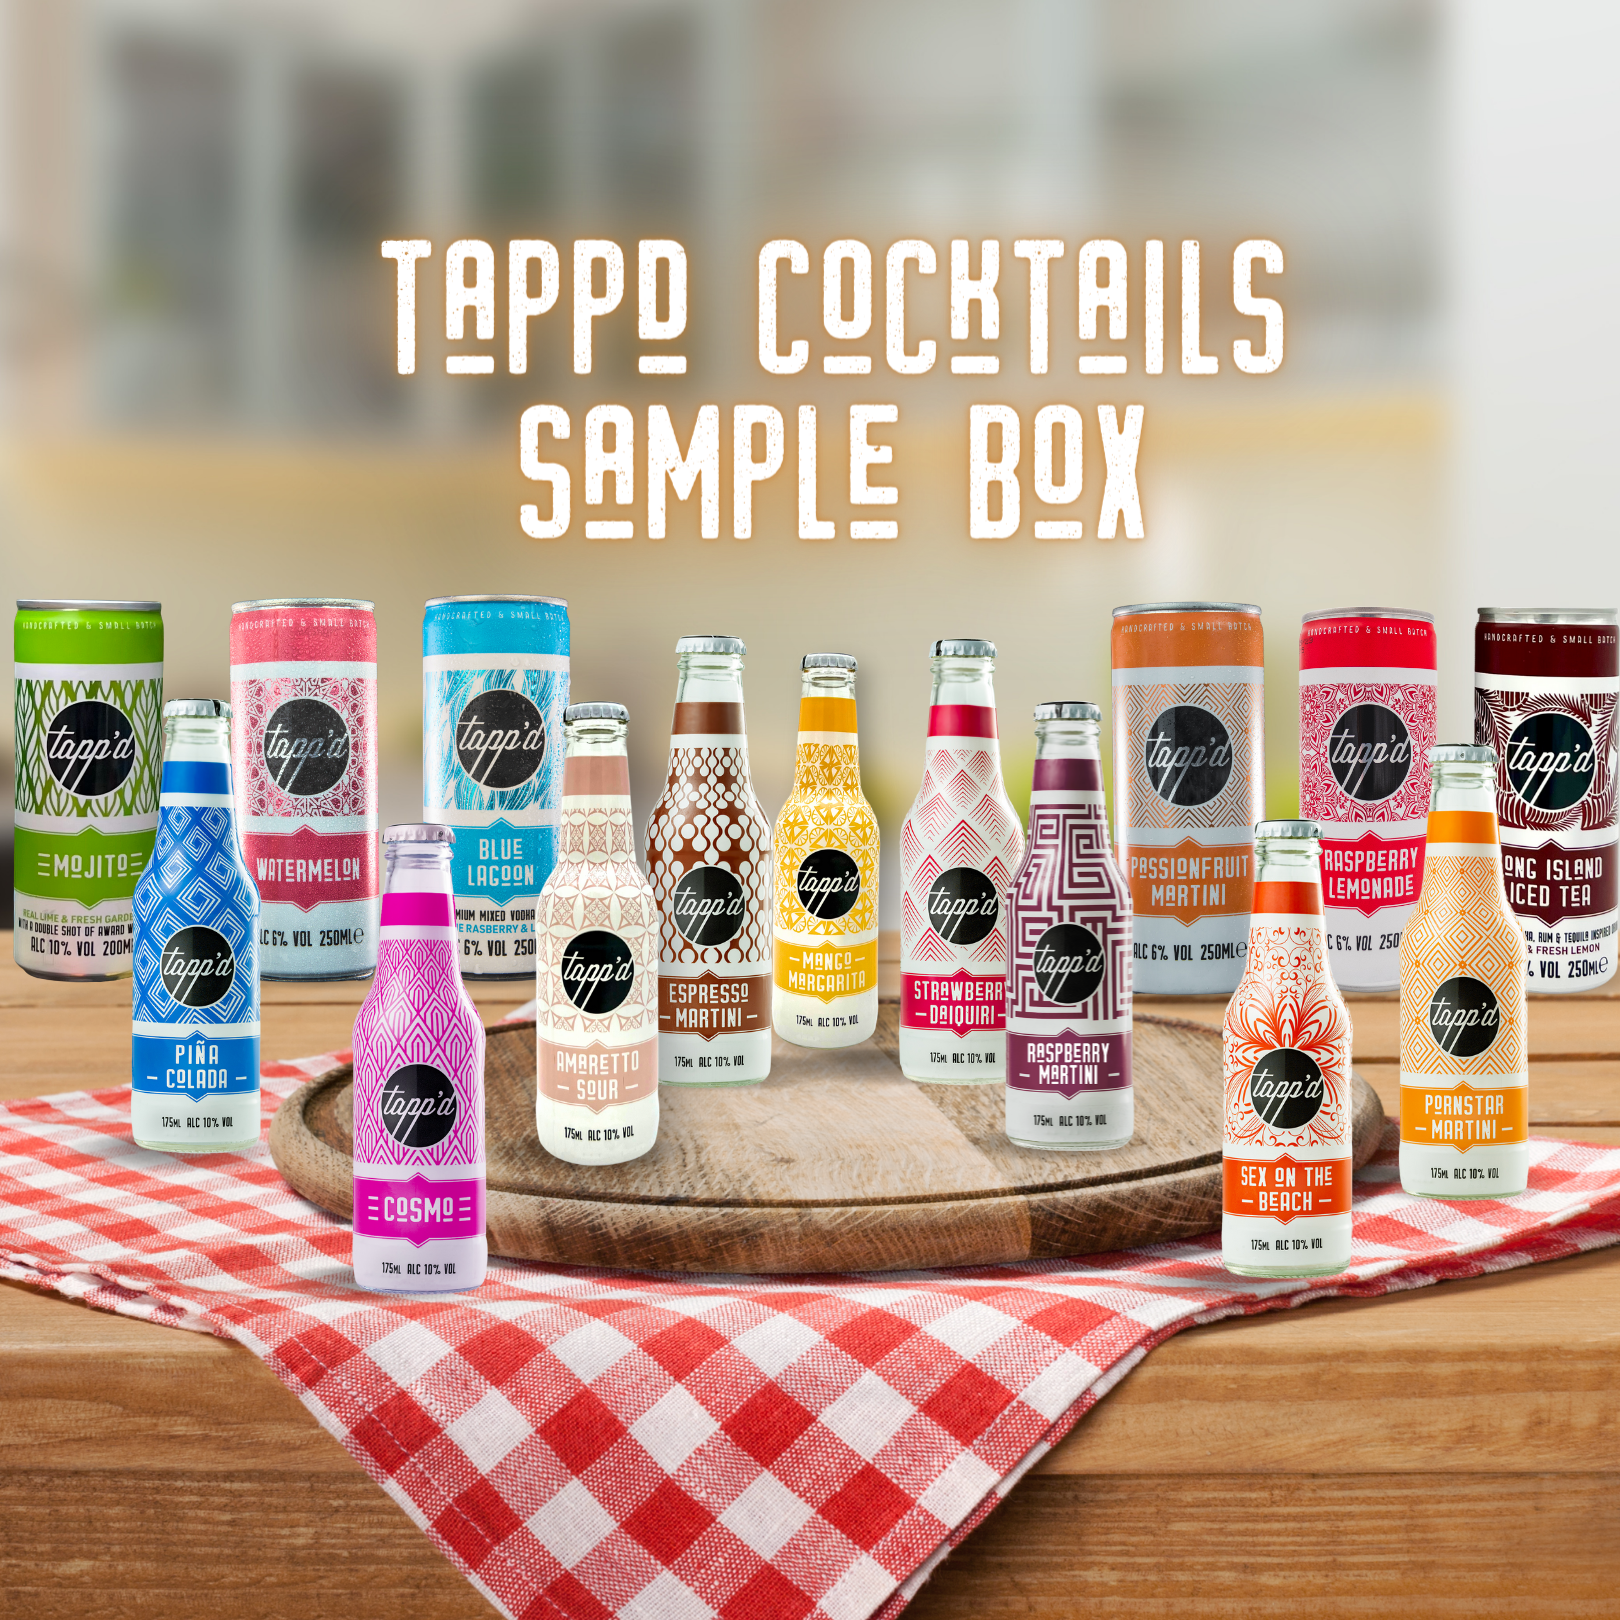 Mixed Packs & Gift Sets Tappd Cocktails